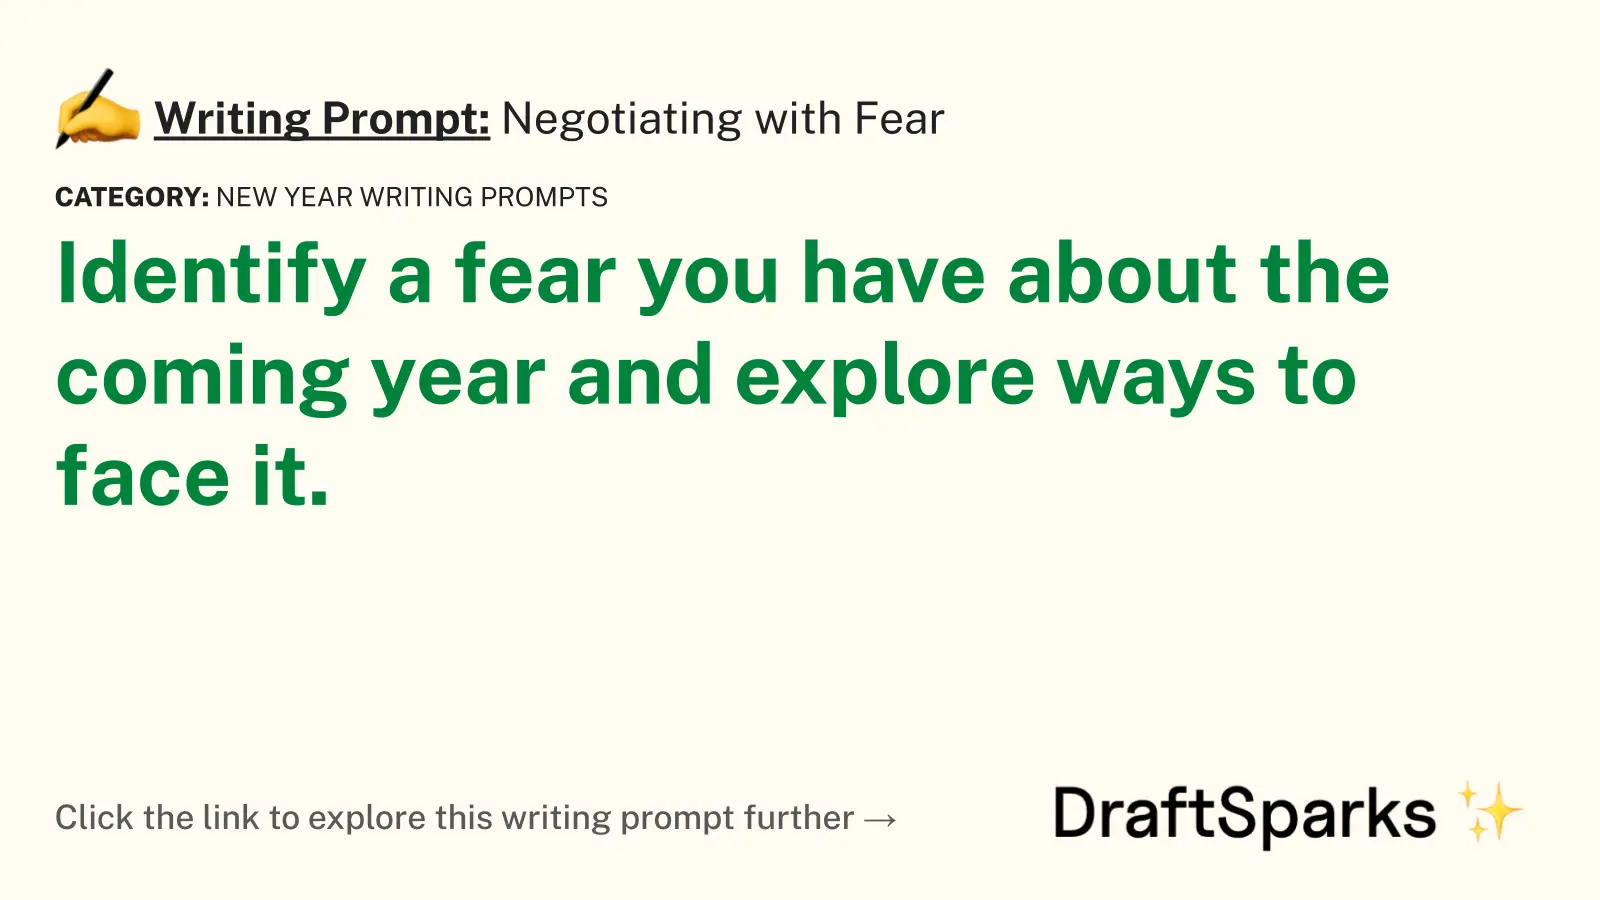 Negotiating with Fear